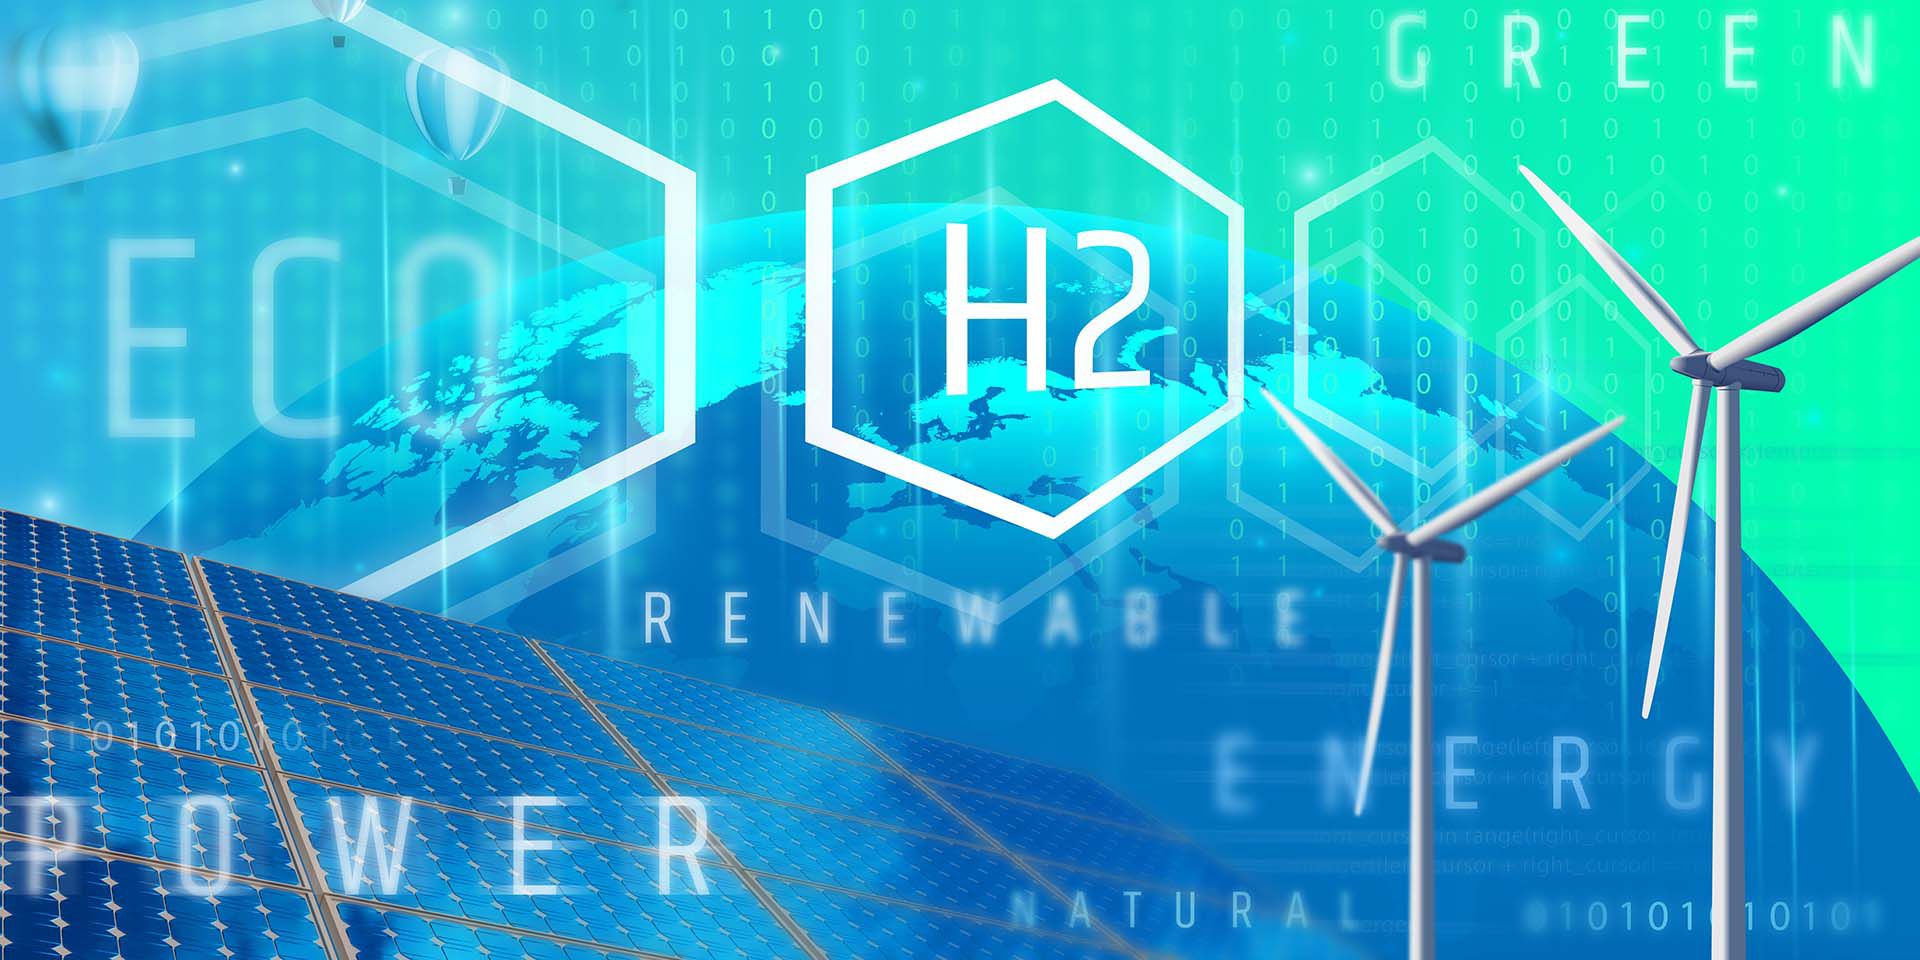 Ecology energy solution. Power to gas concept. Hydrogen energy storage with renewable energy sources - photovoltaic and wind turbine power plant in a fresh nature. 3d rendering.